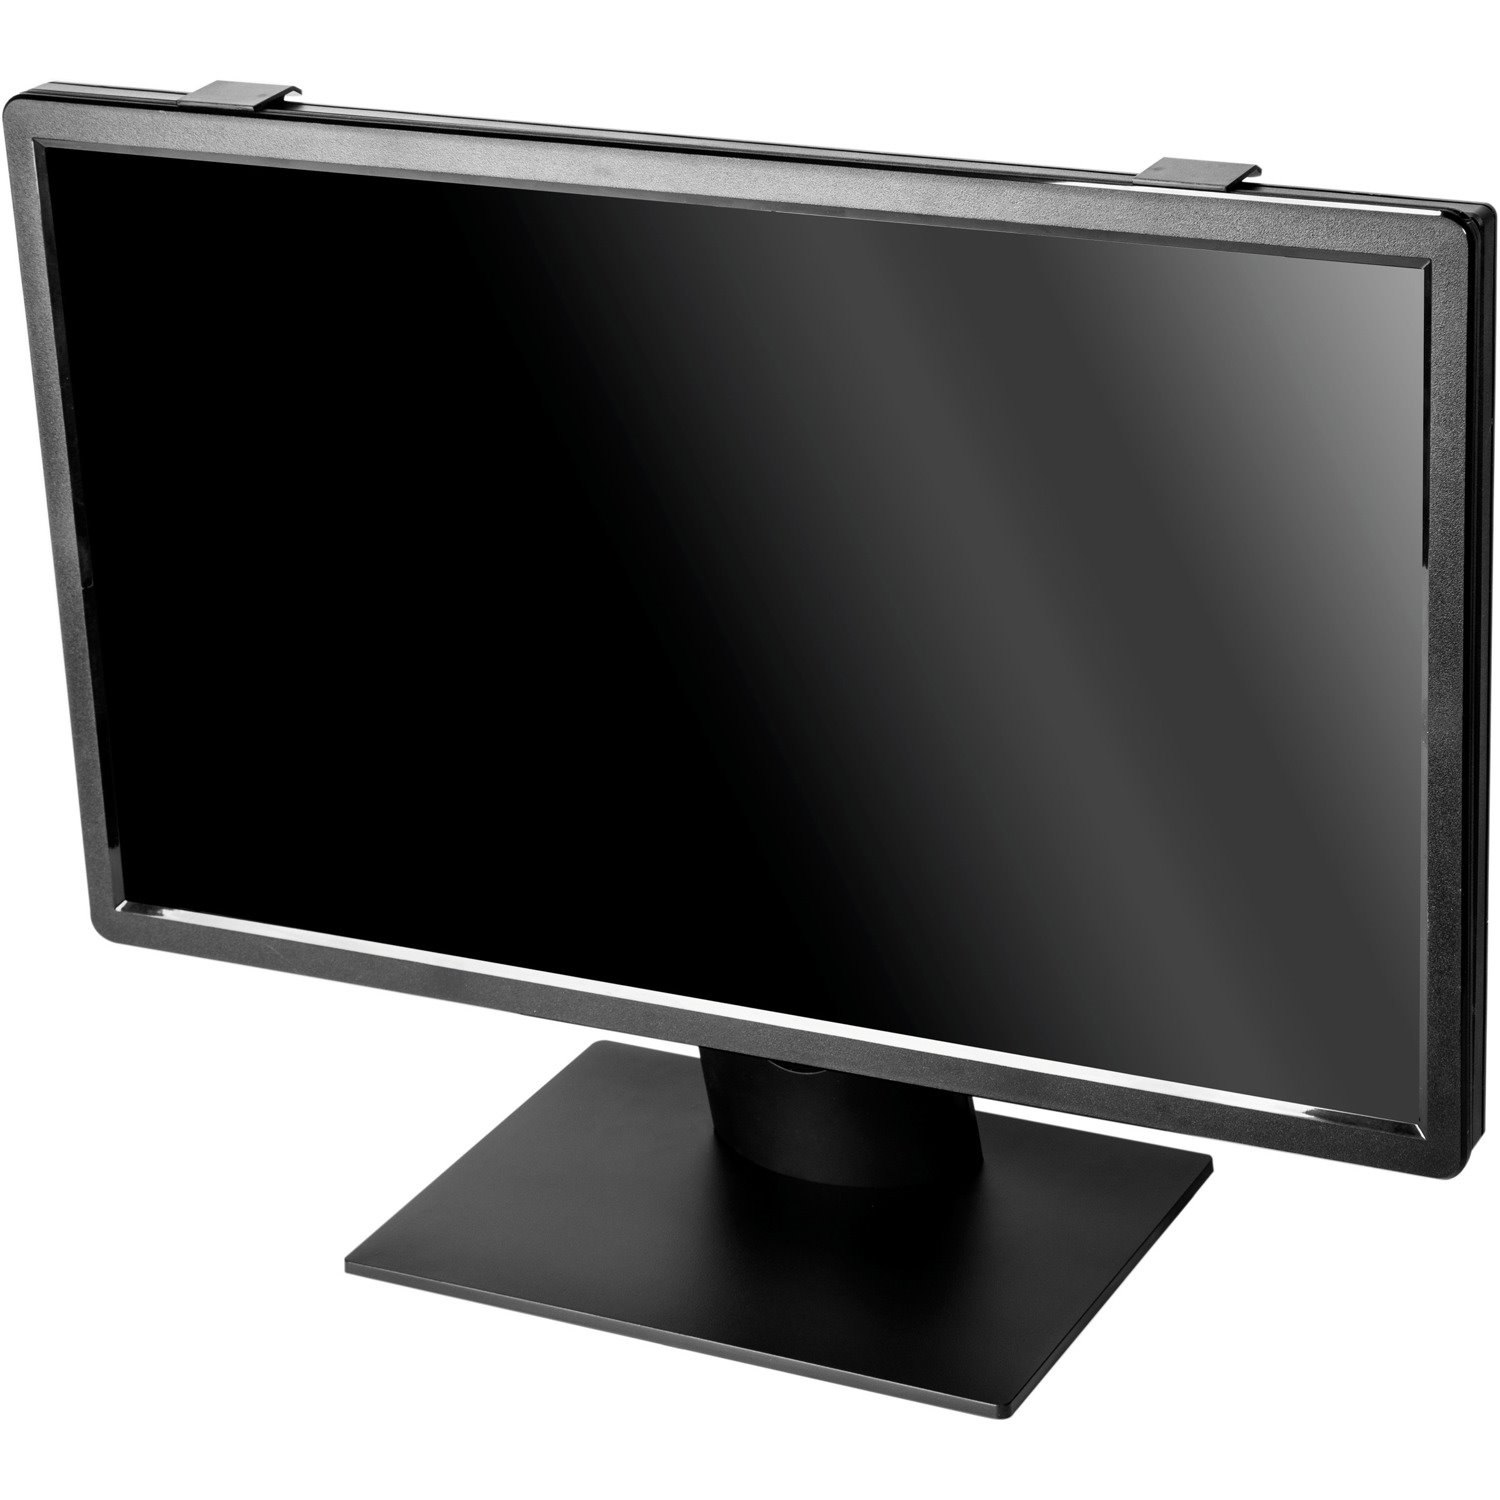 Rocstor PrivacyView&trade; Premium Framed Privacy Filter for 24 Widescreen Monitor - For 24" Monitor / Display - 16:10 Aspect Ratio - Framed - Black - Comparable to PF240W1F- For 24" Widescreen LCD Monitor - 16:10 - Dust Resistant - For 24" Widescreen LCD Monitor - 16:10 - Dust Resistant, Fingerprint Resistant, Scratch Resistant, Damage Resistant - Anti-glare